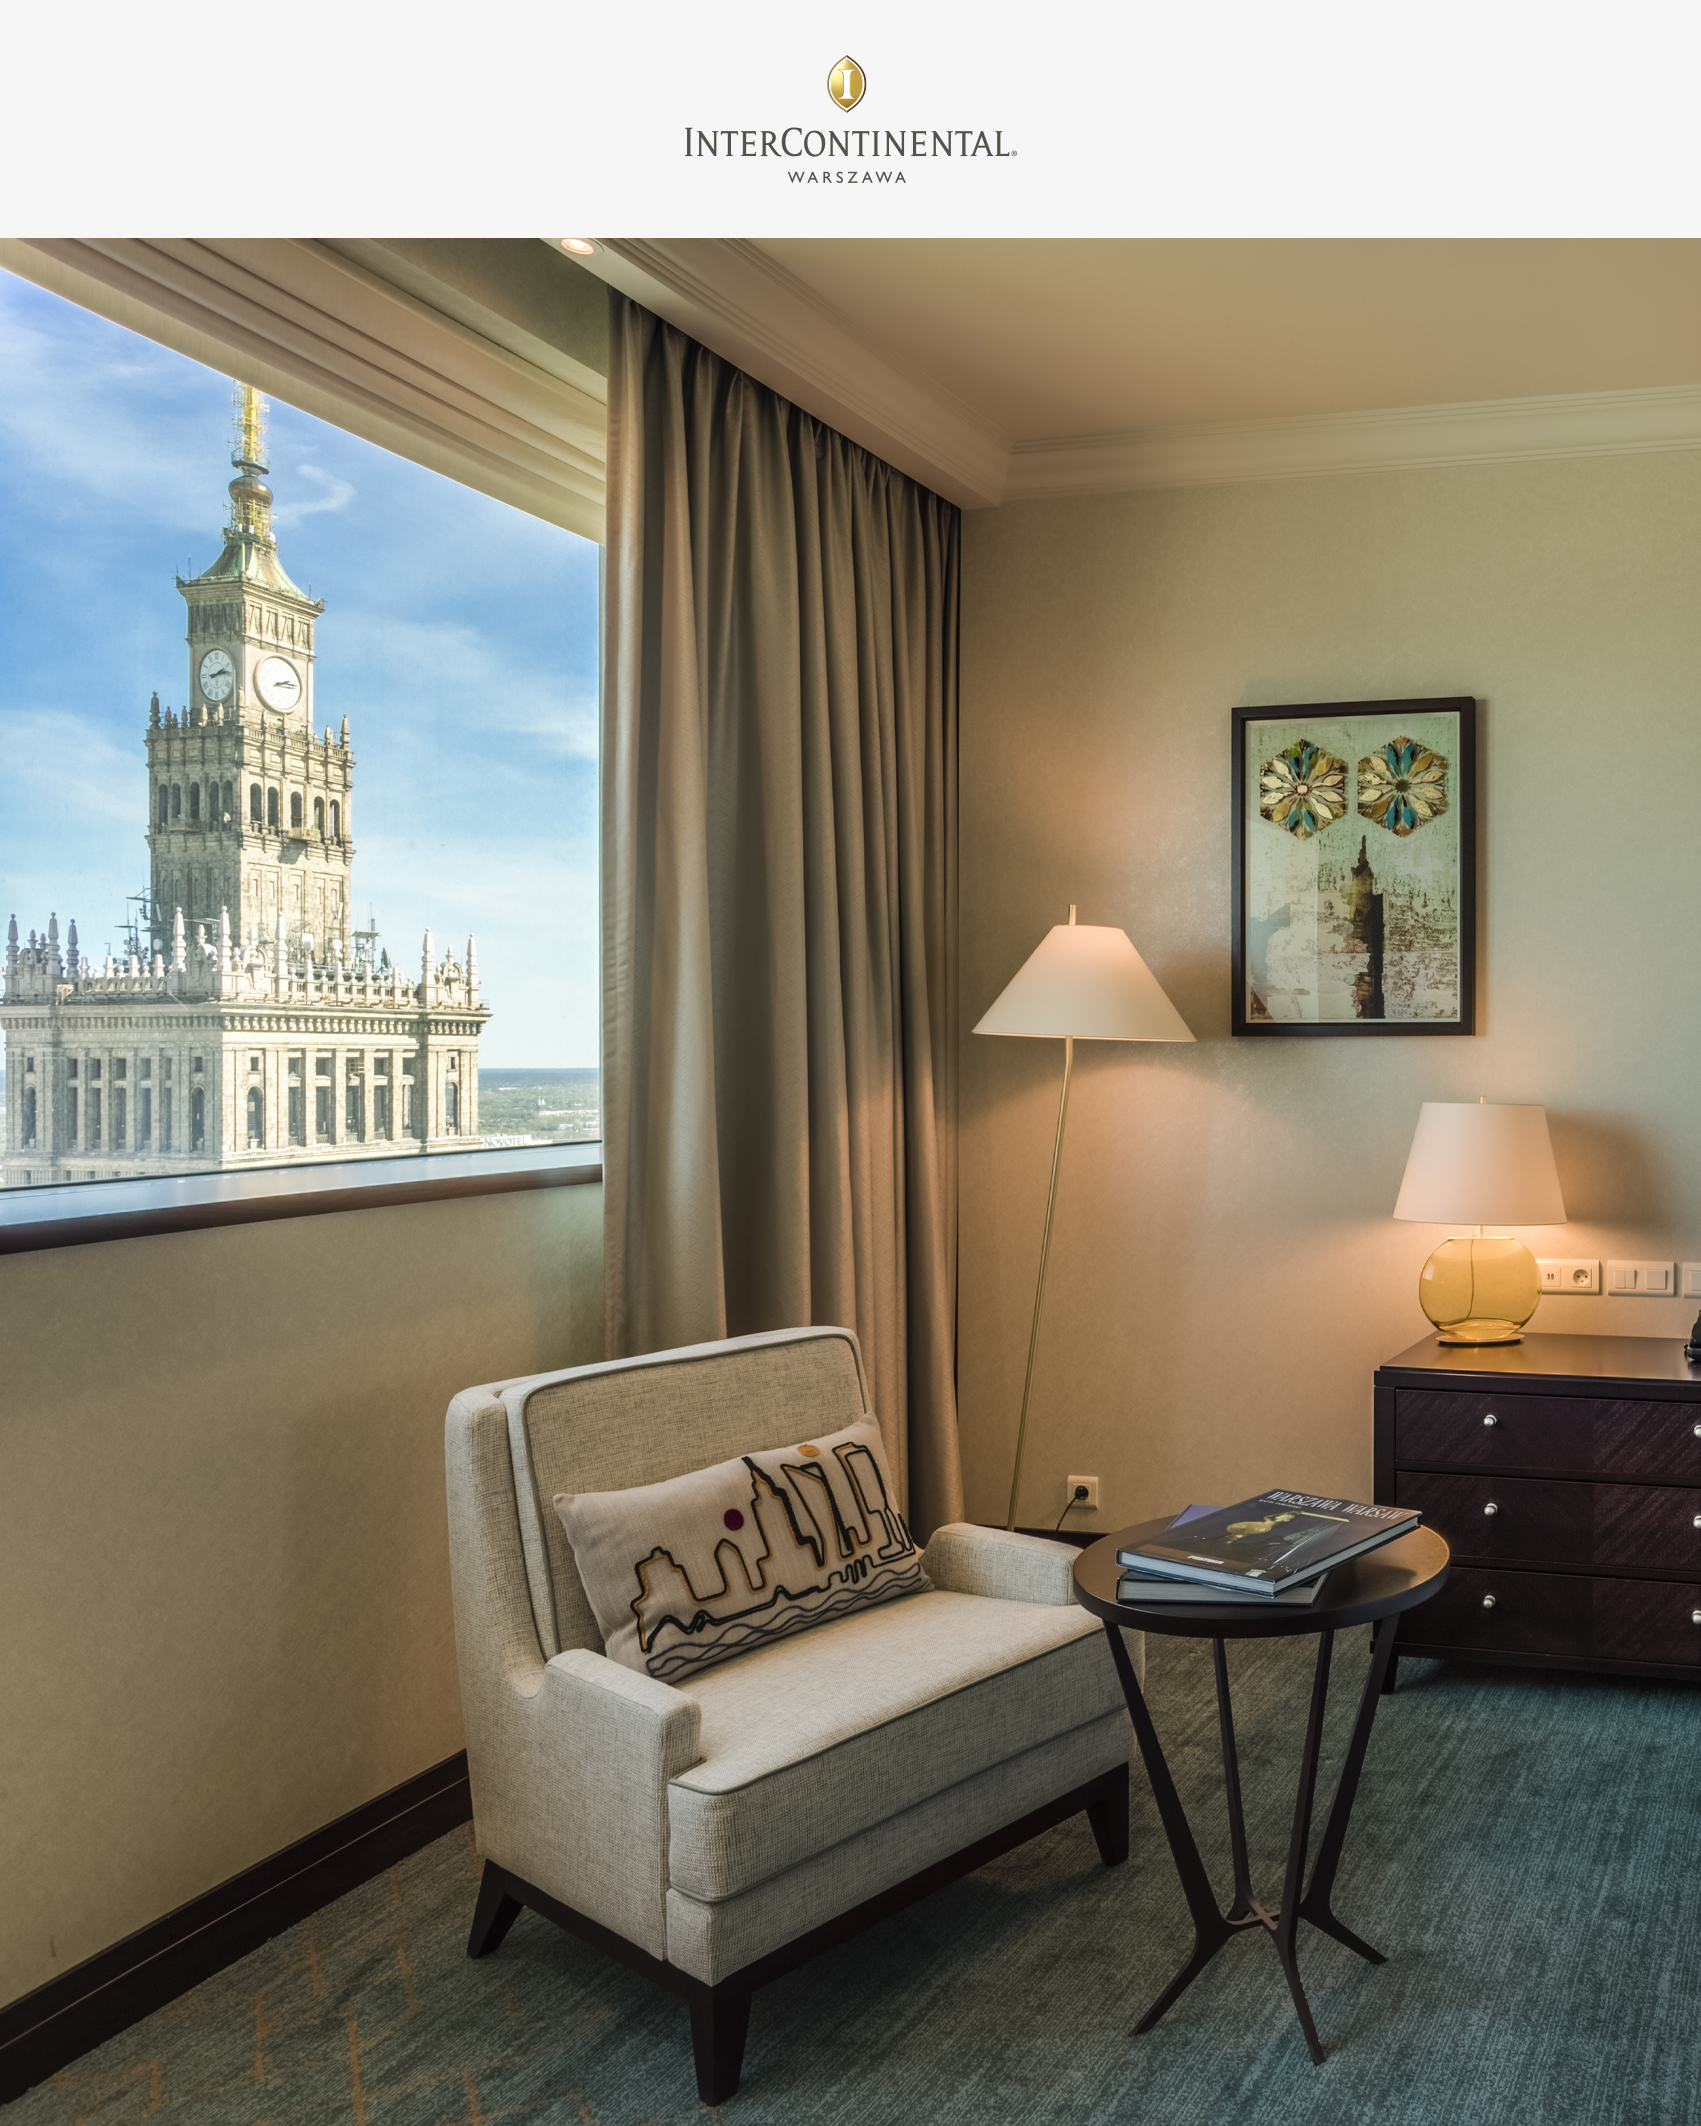 Stay in a Classic Room on a High Floor with a view of the Palace of Culture and Science (2 nights / 1 person)